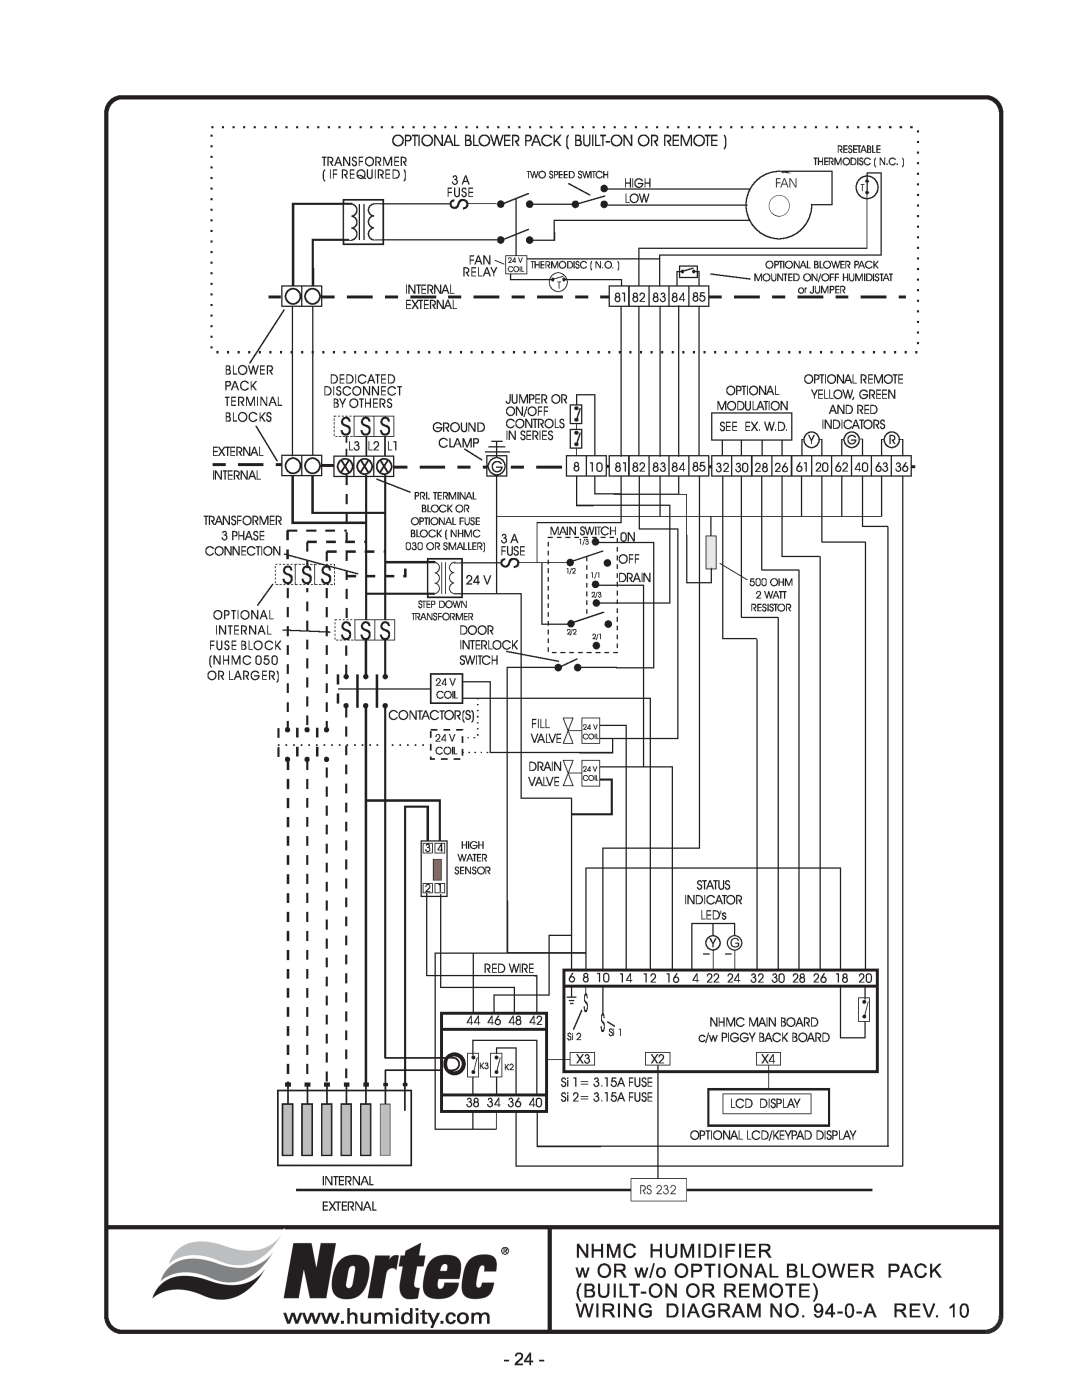 Nortec 132-3091 S S S, Nhmc Humidifier, w OR w/o OPTIONAL BLOWER PACK BUILT-ONOR REMOTE, WIRING DIAGRAM NO. 94-0-AREV 